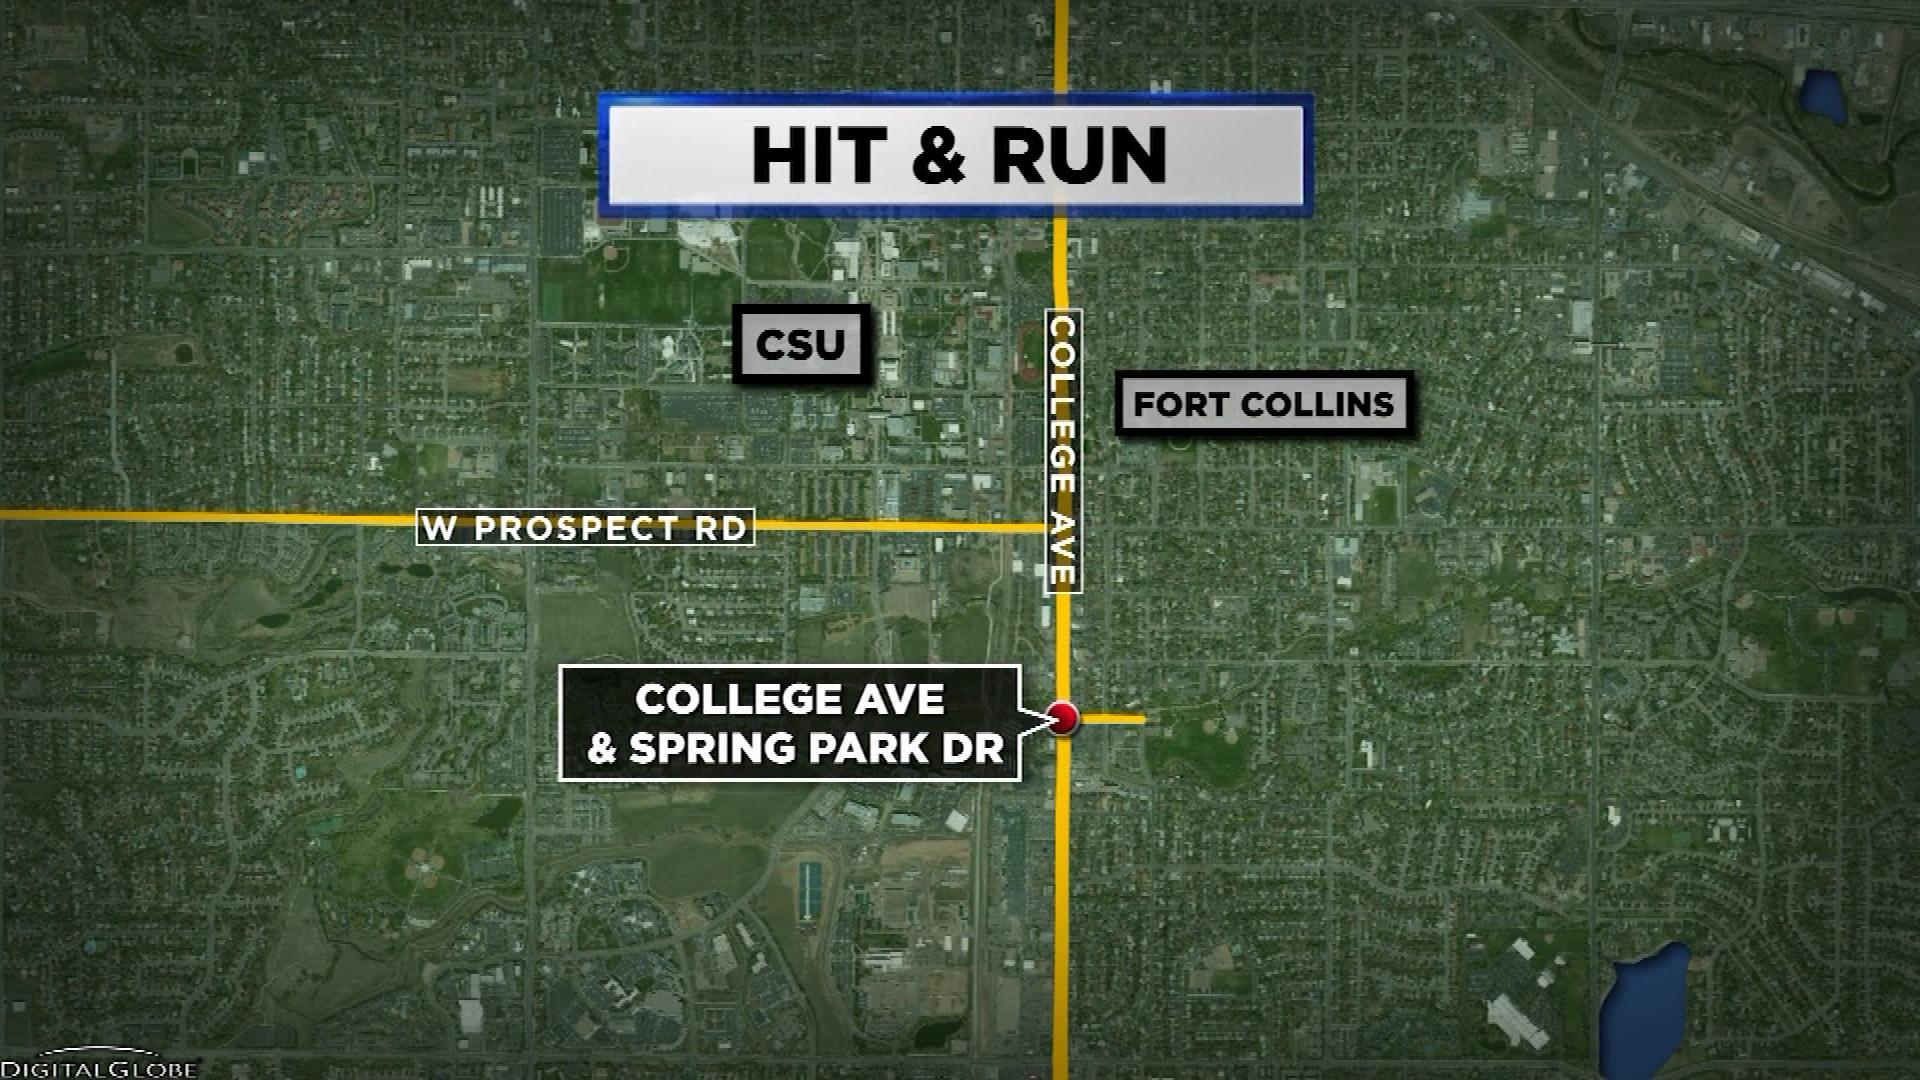 FORT COLLINS HIT AND RUN map